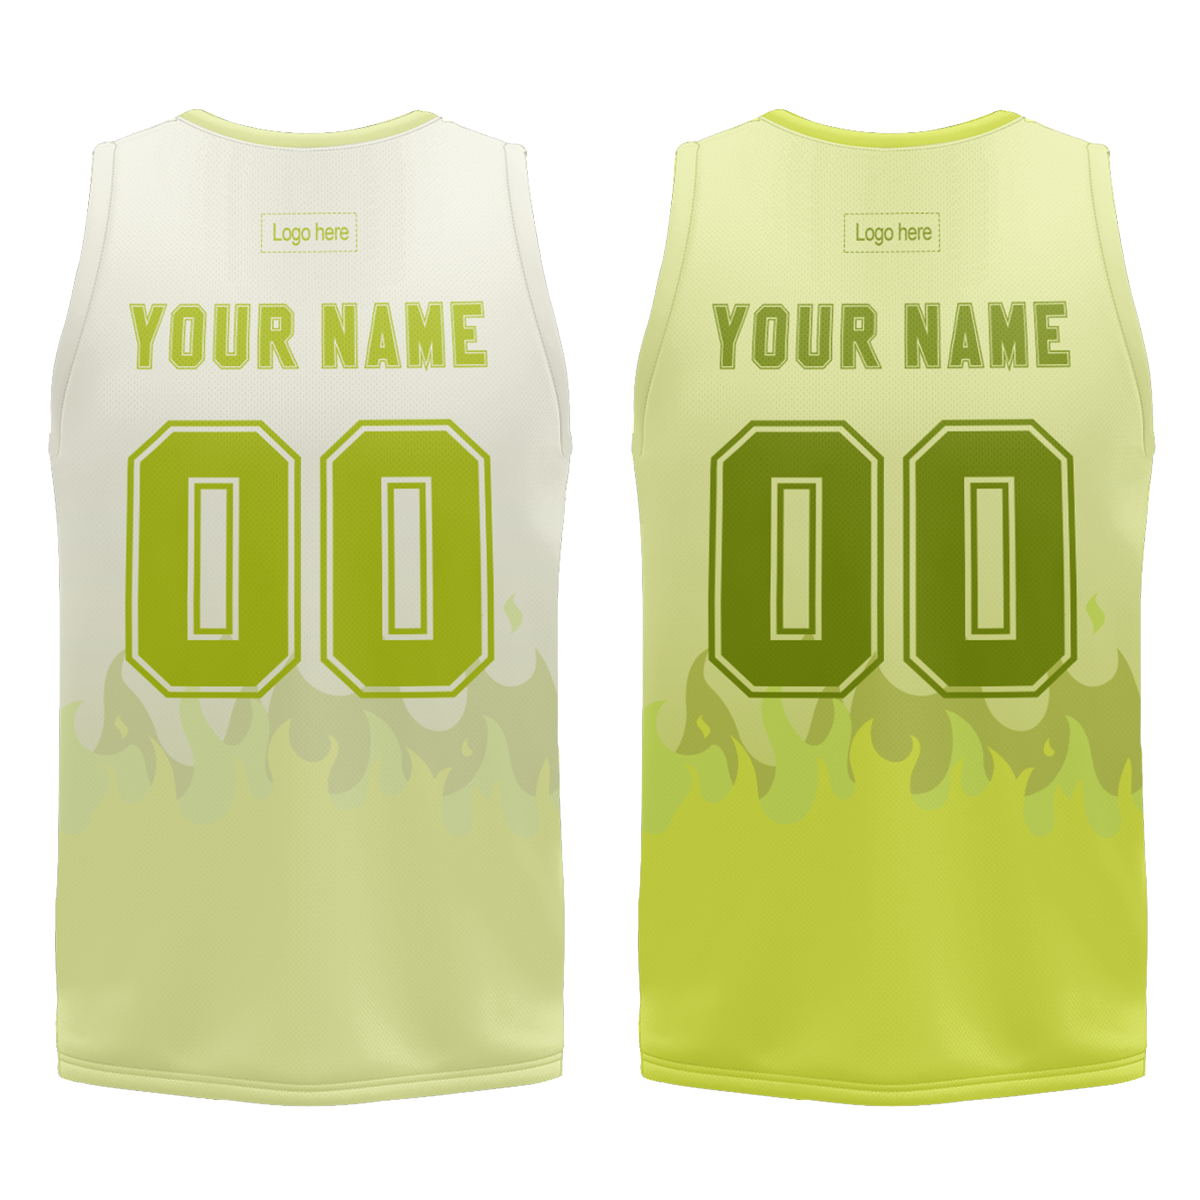 customized-with-personalized-logo-and-printing-basketball-team-name-reversible-basketball-jerseys-at-cj-pod-6